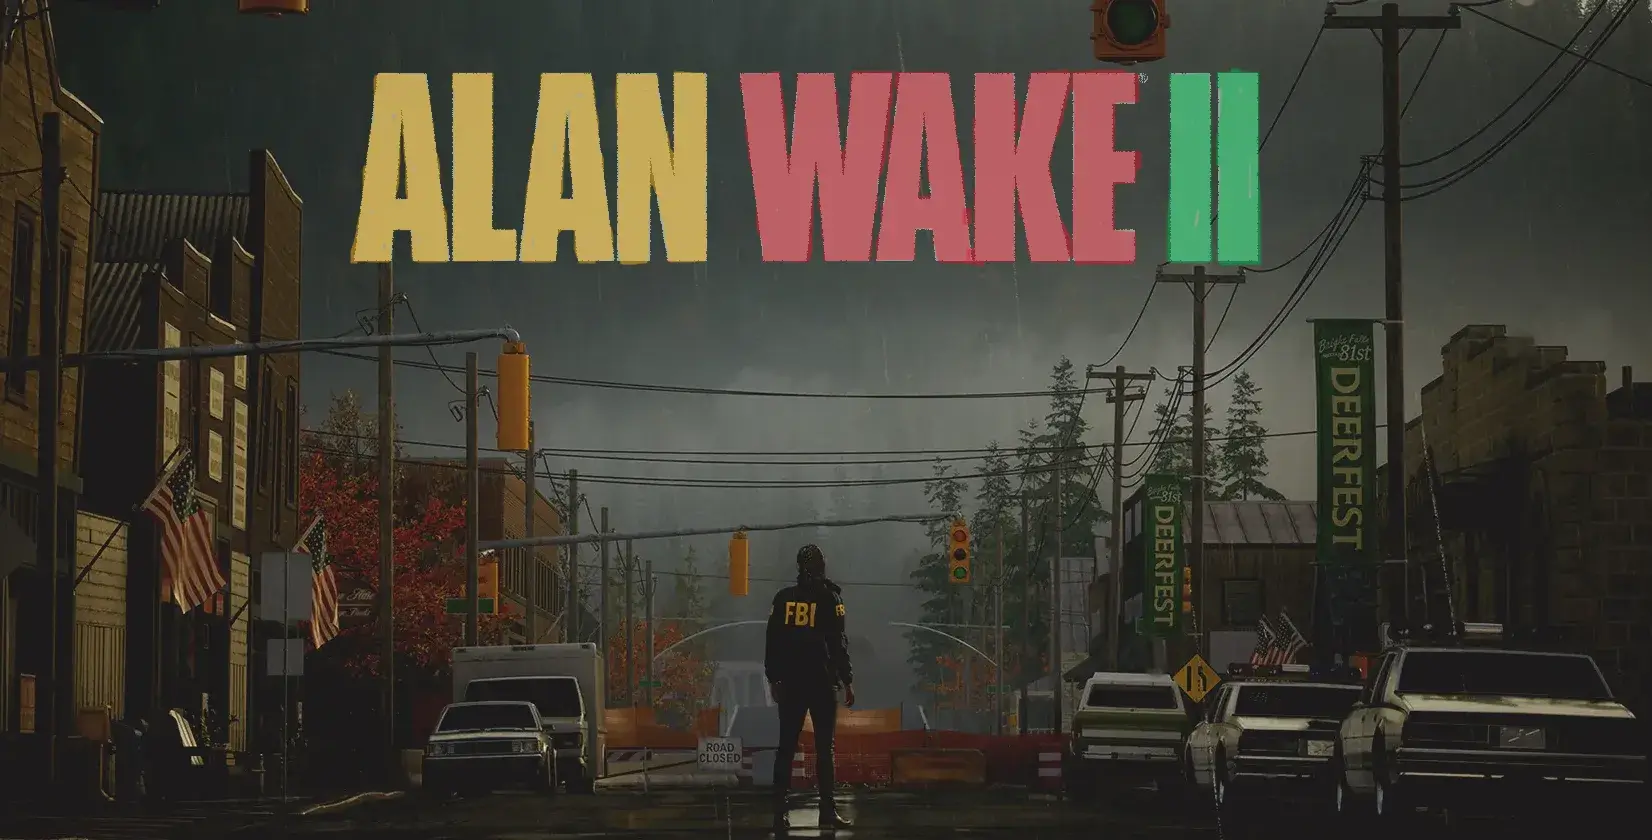 Alan Wake II Release Date And System Requirements